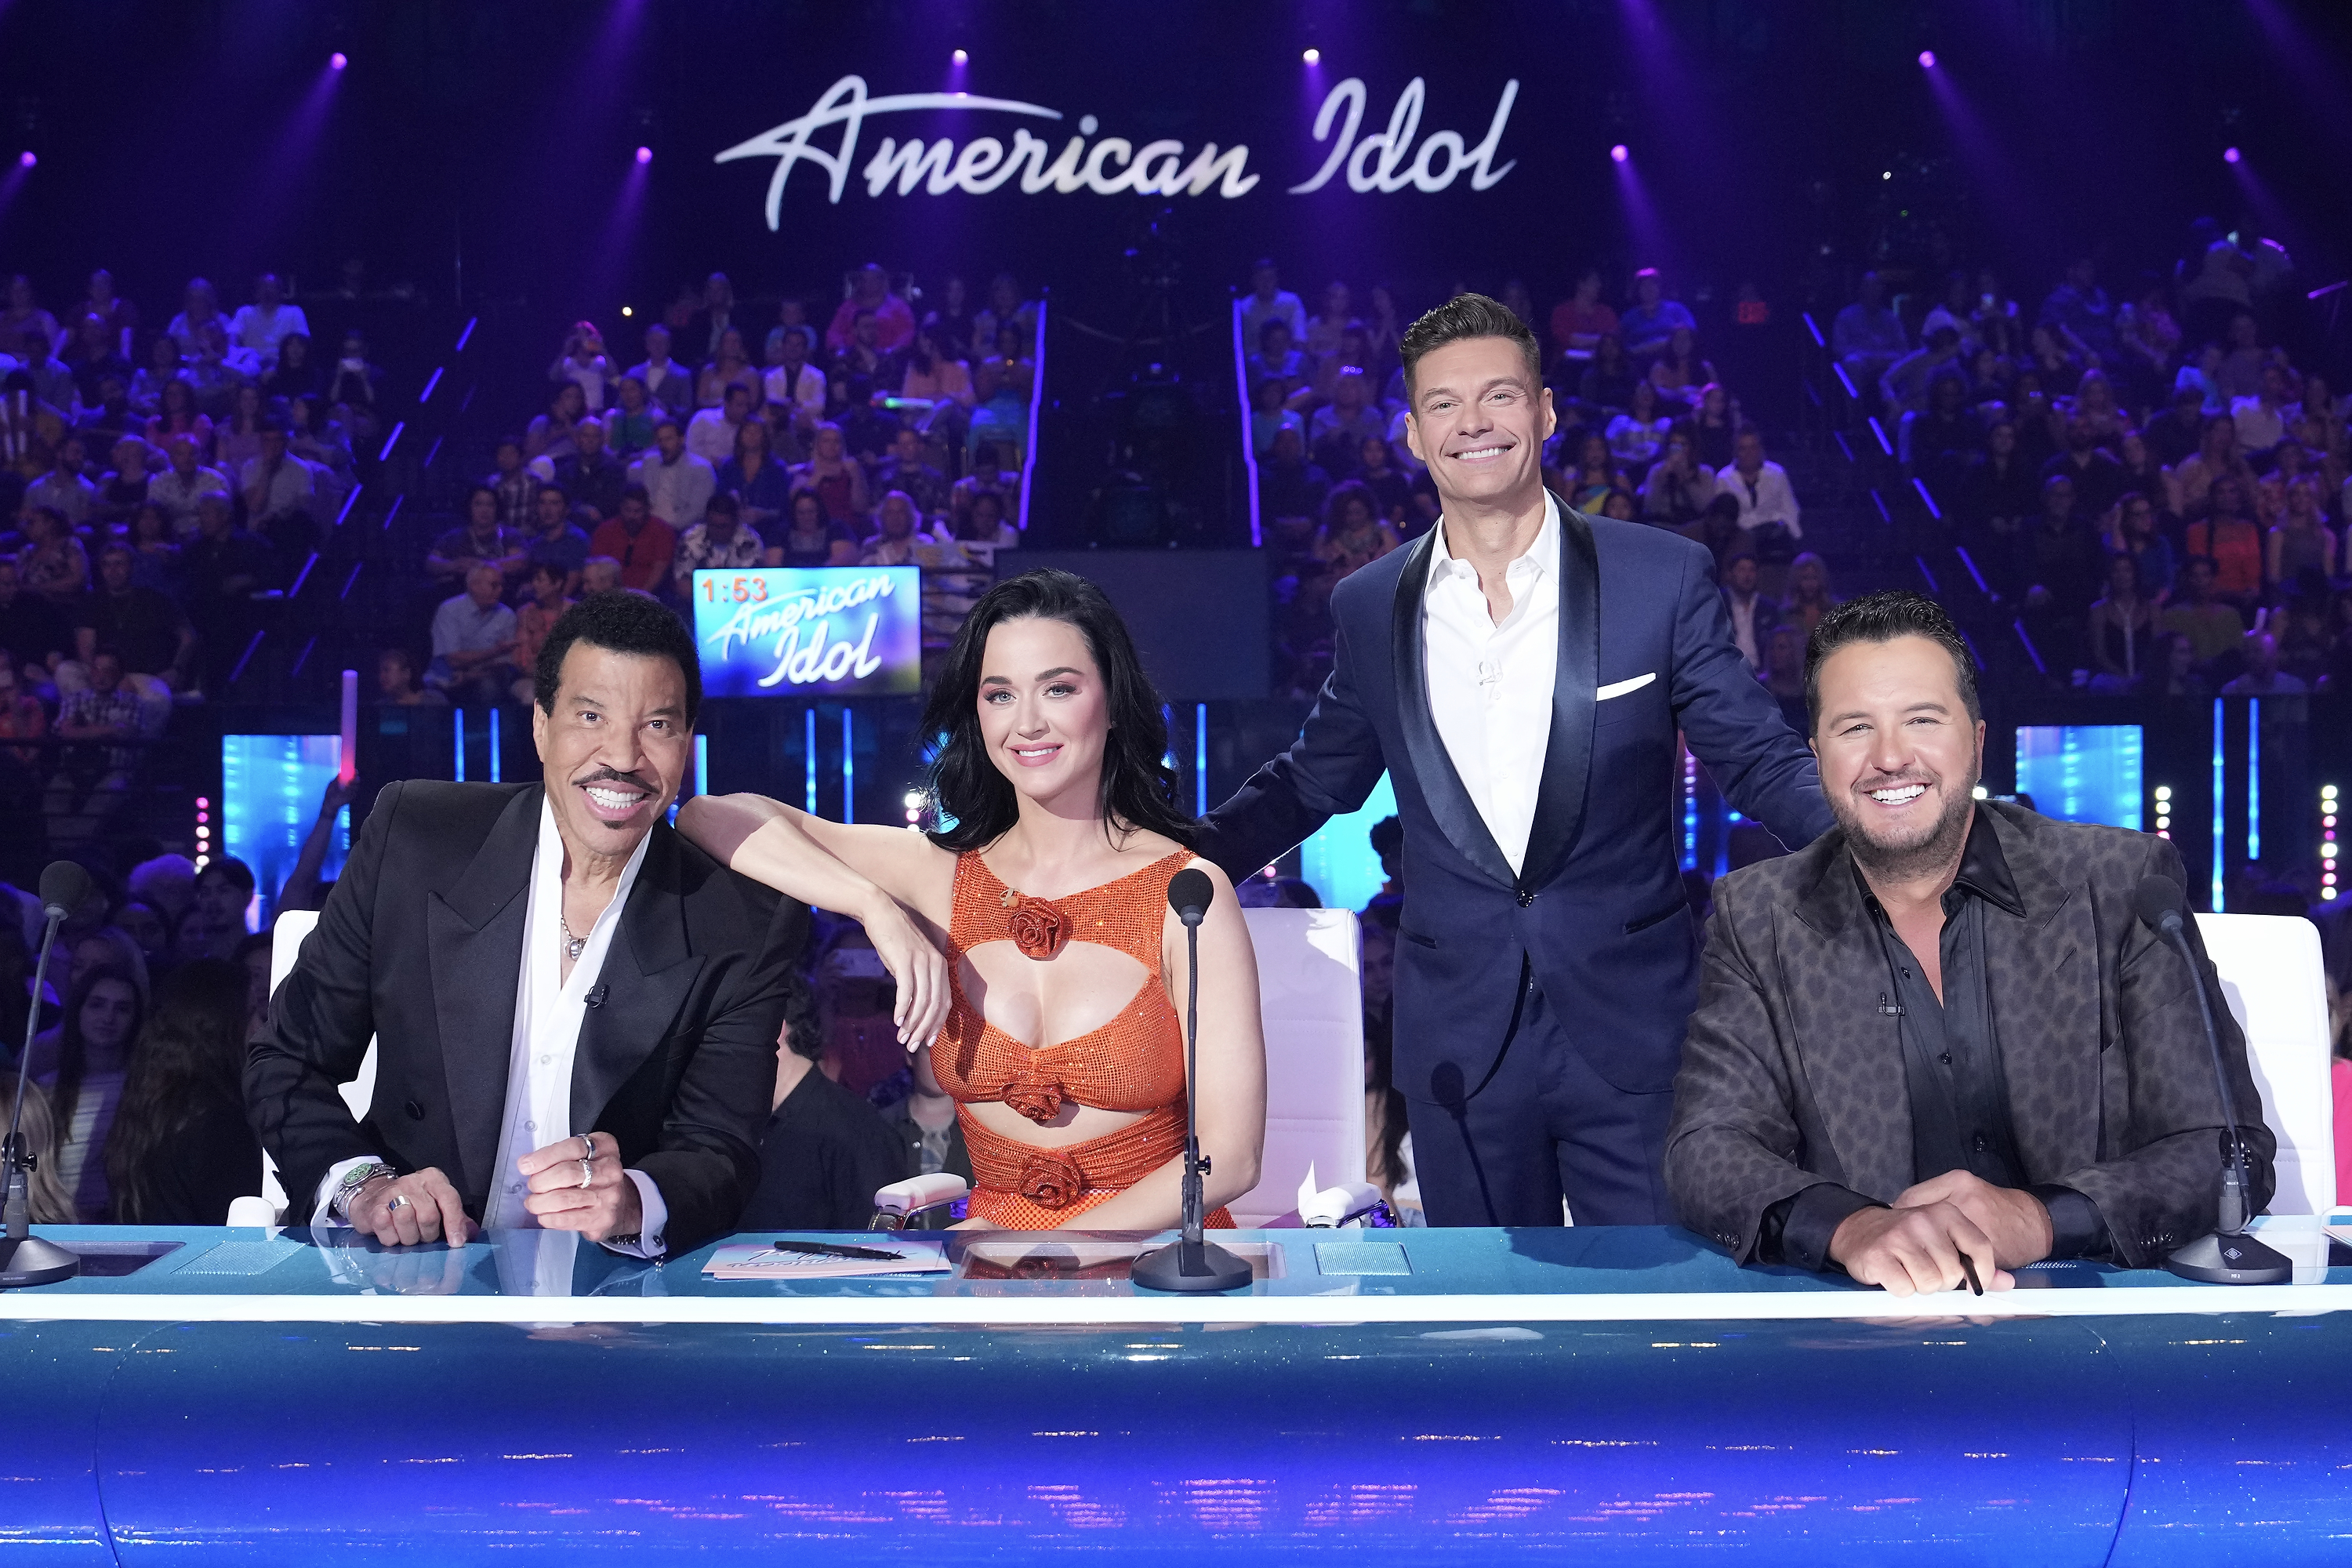 Katy announced her departure from American Idol, where she's served as a judge since 2018